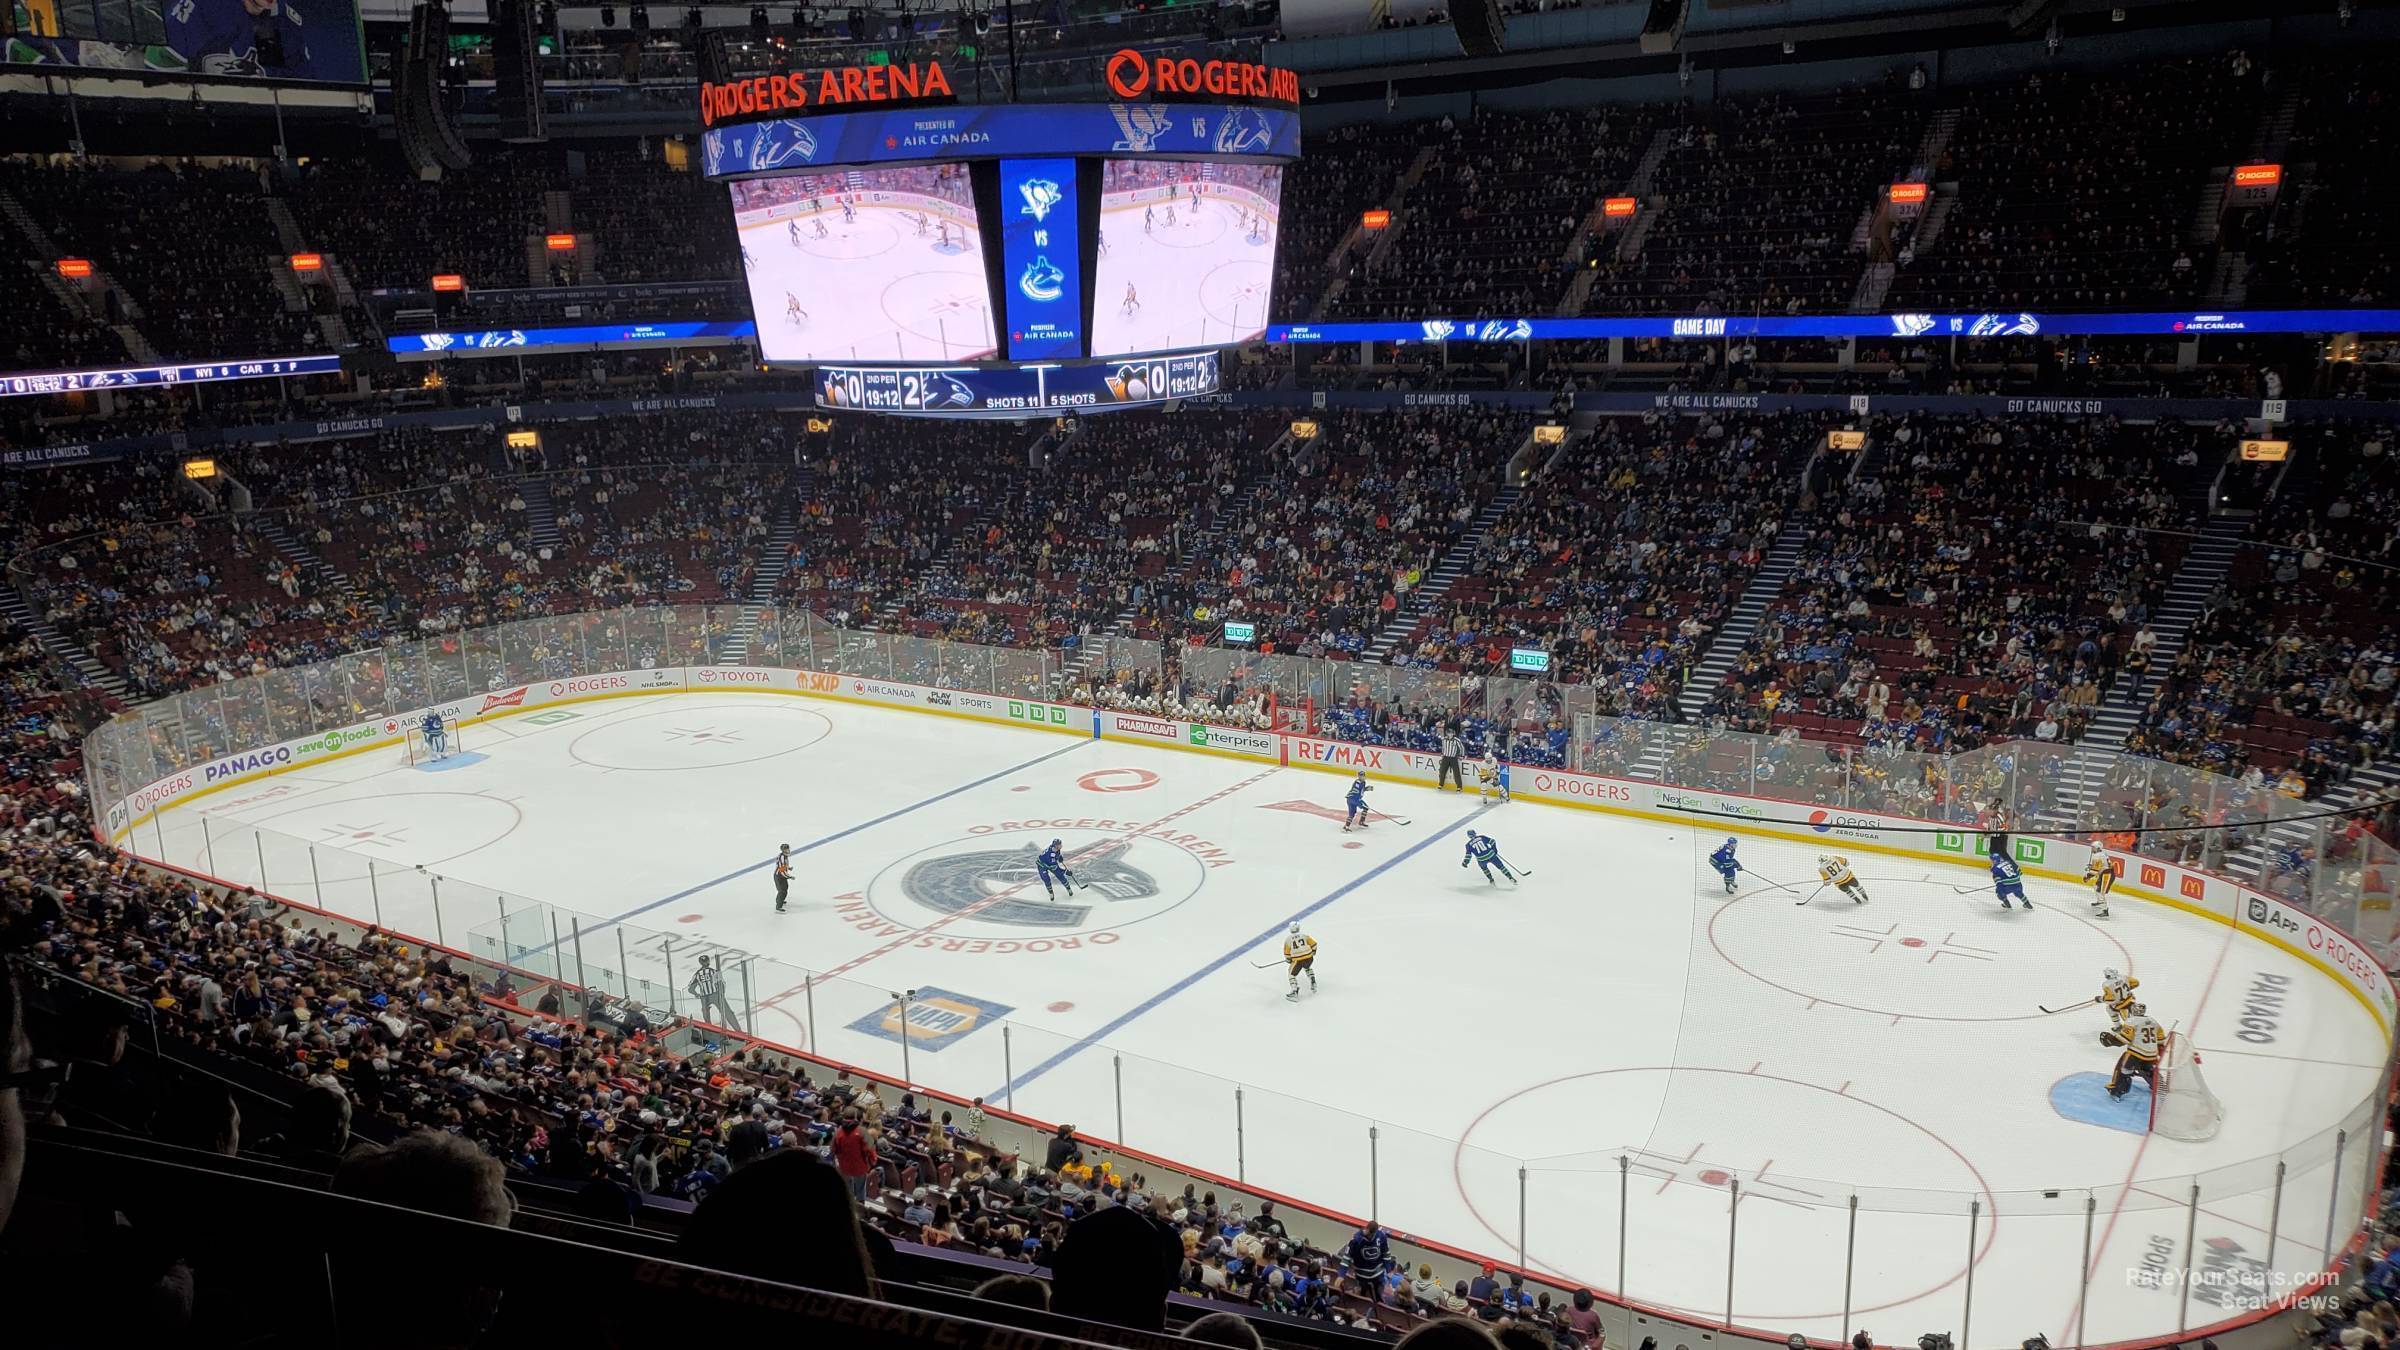 section 305, row 4 seat view  for hockey - rogers arena